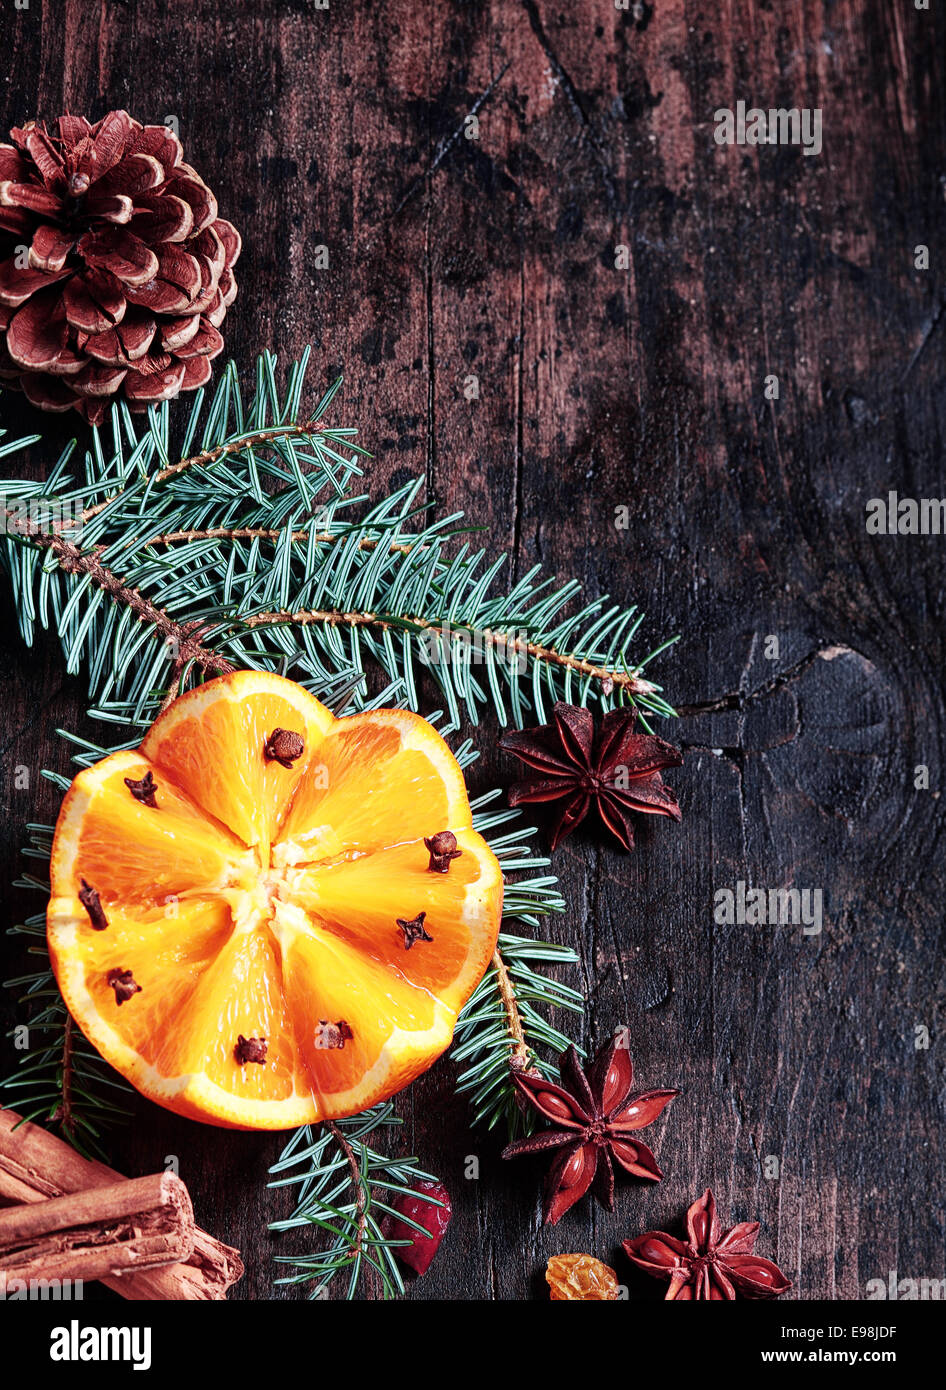 Christmas Orange with Spruce and Pine Corn on Wooden Table Stock Photo